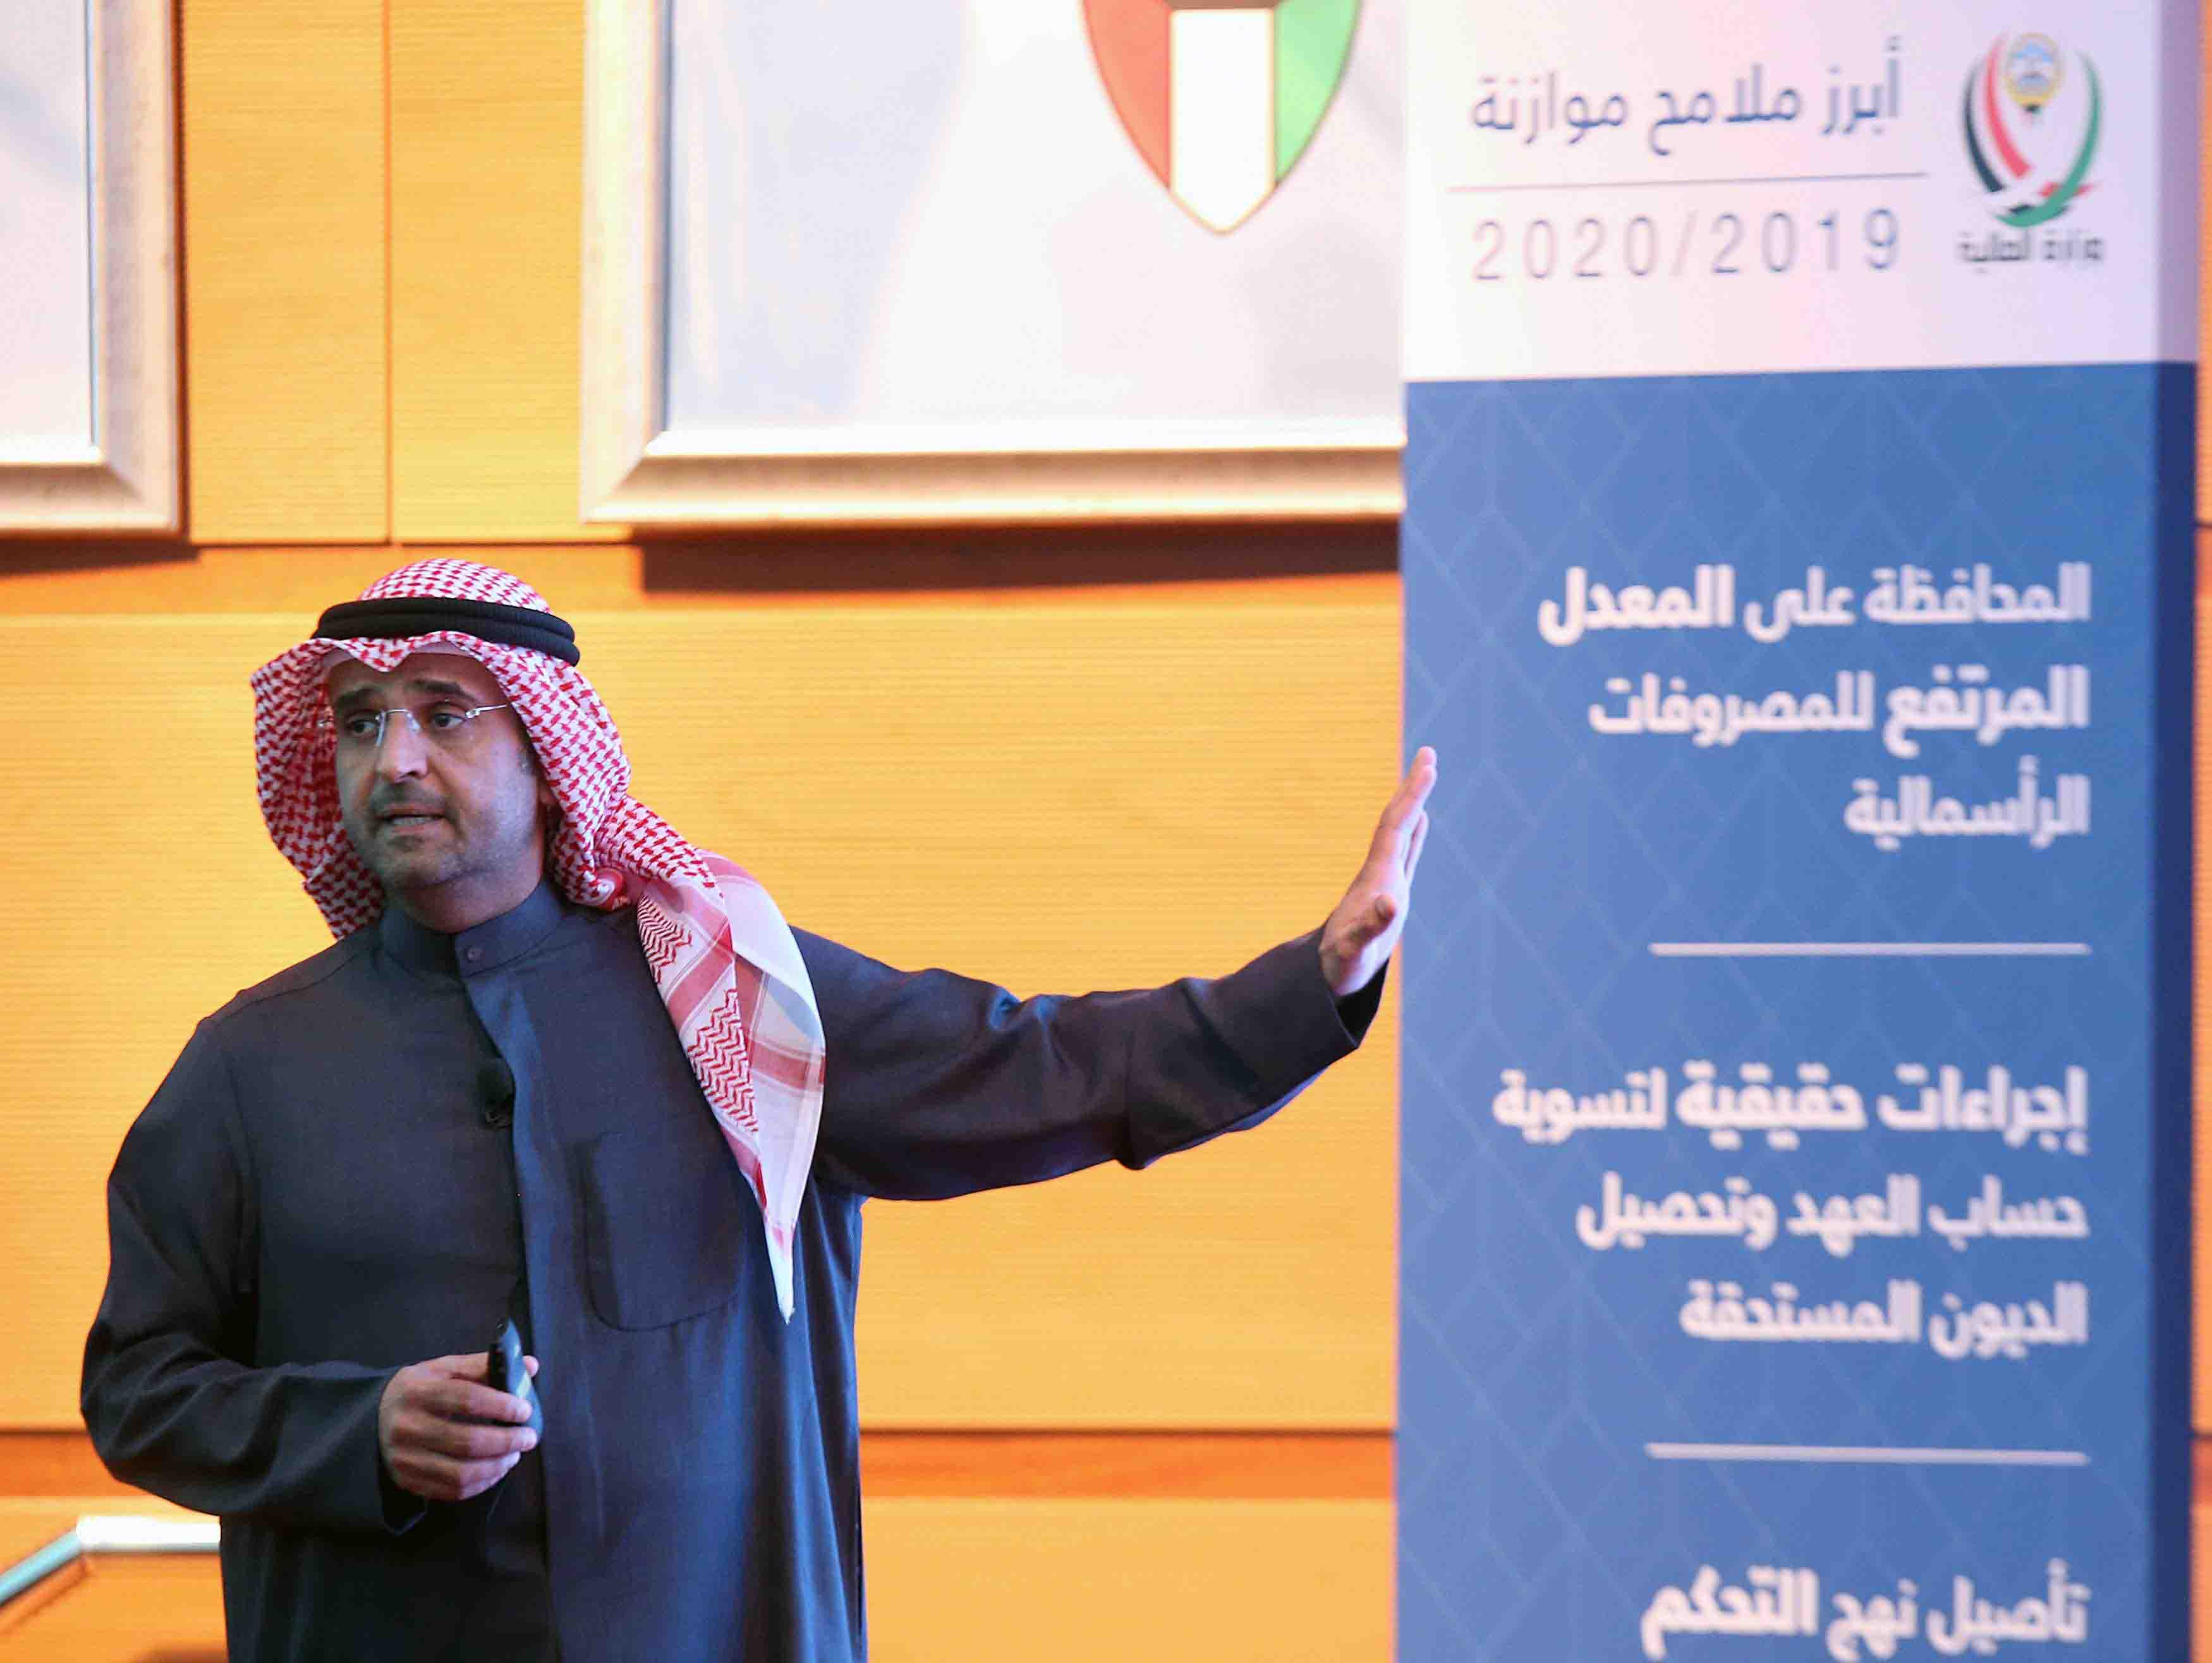 Kuwaiti Minister of Finance Nayef al-Hajraf speaks during a news conference in Kuwait City to announce the 2019-20 budget, last January